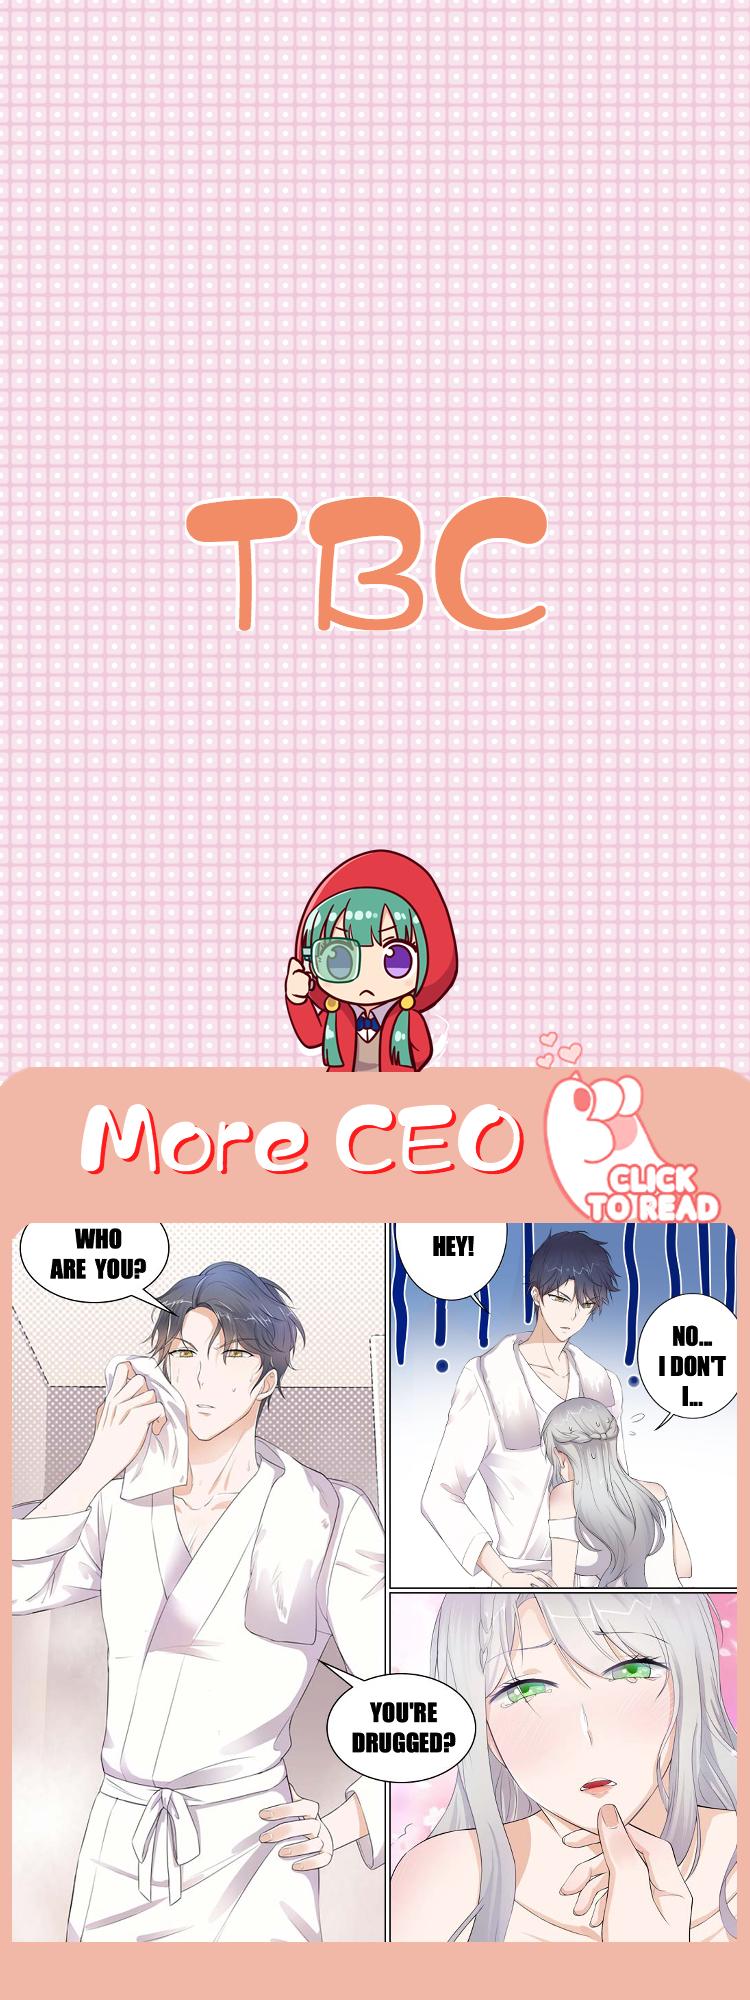 Love Me Gently, Bossy CEO chapter 19